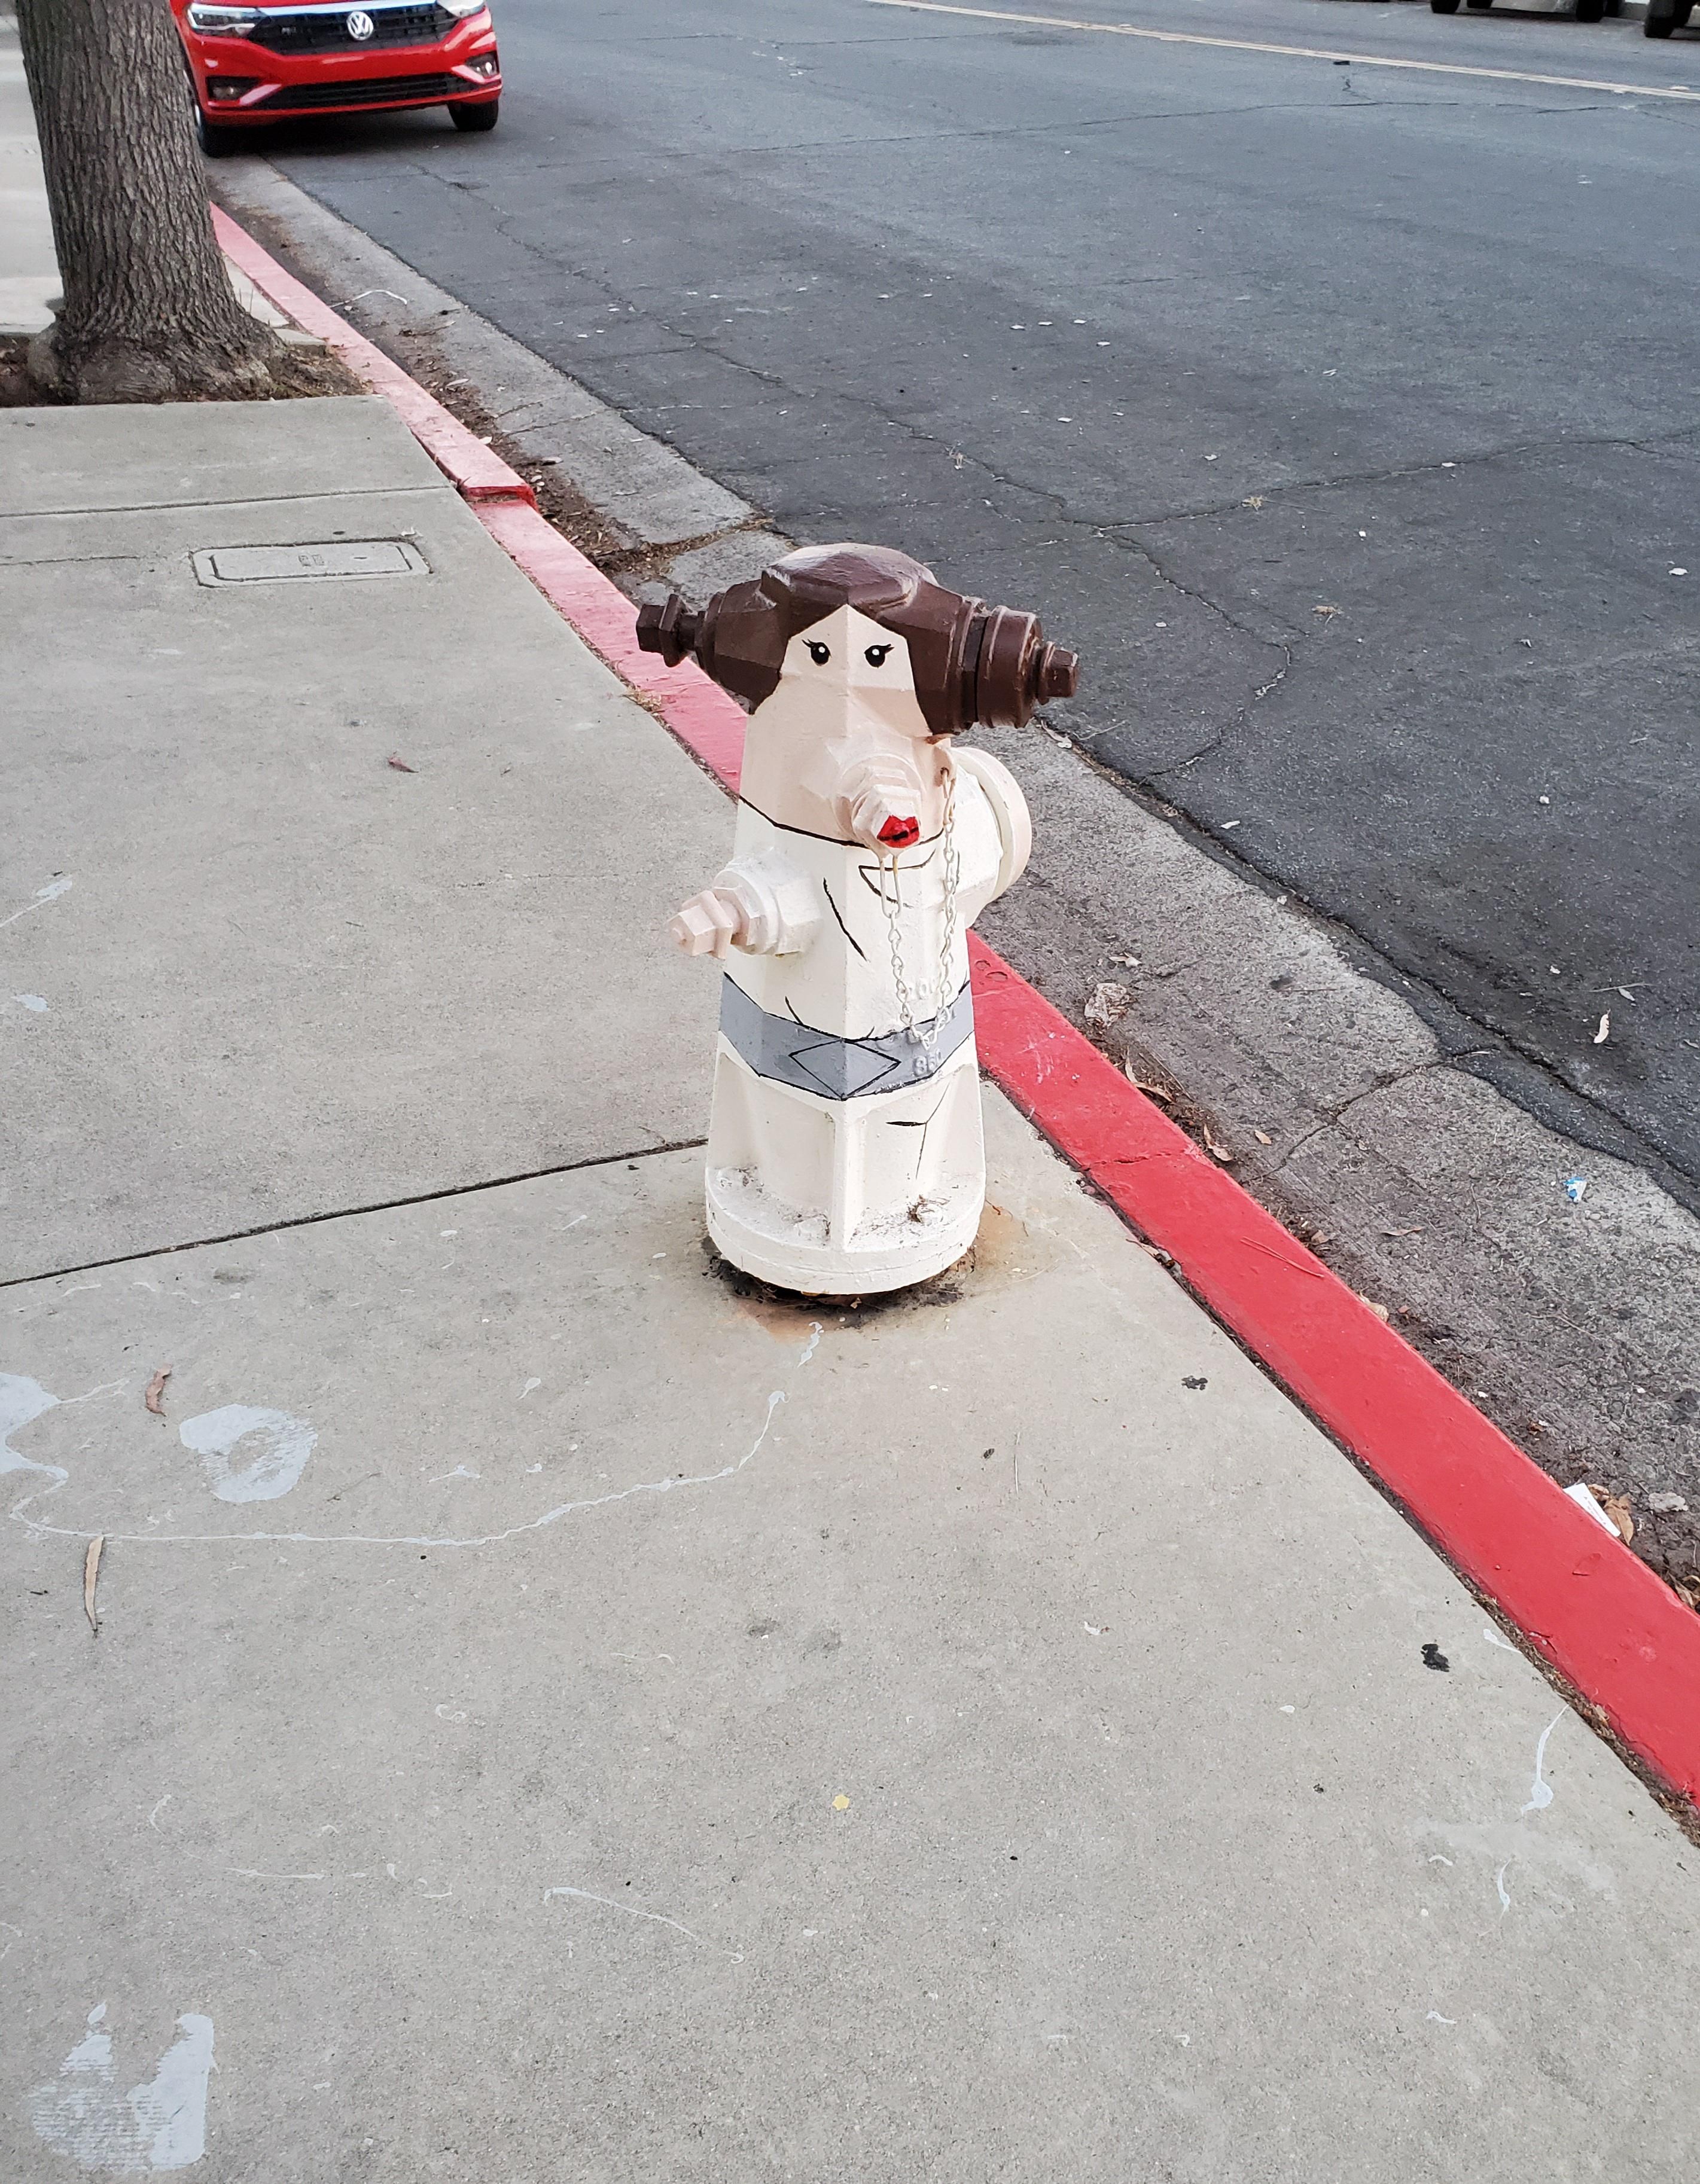 This is not the hydrant you expected today...